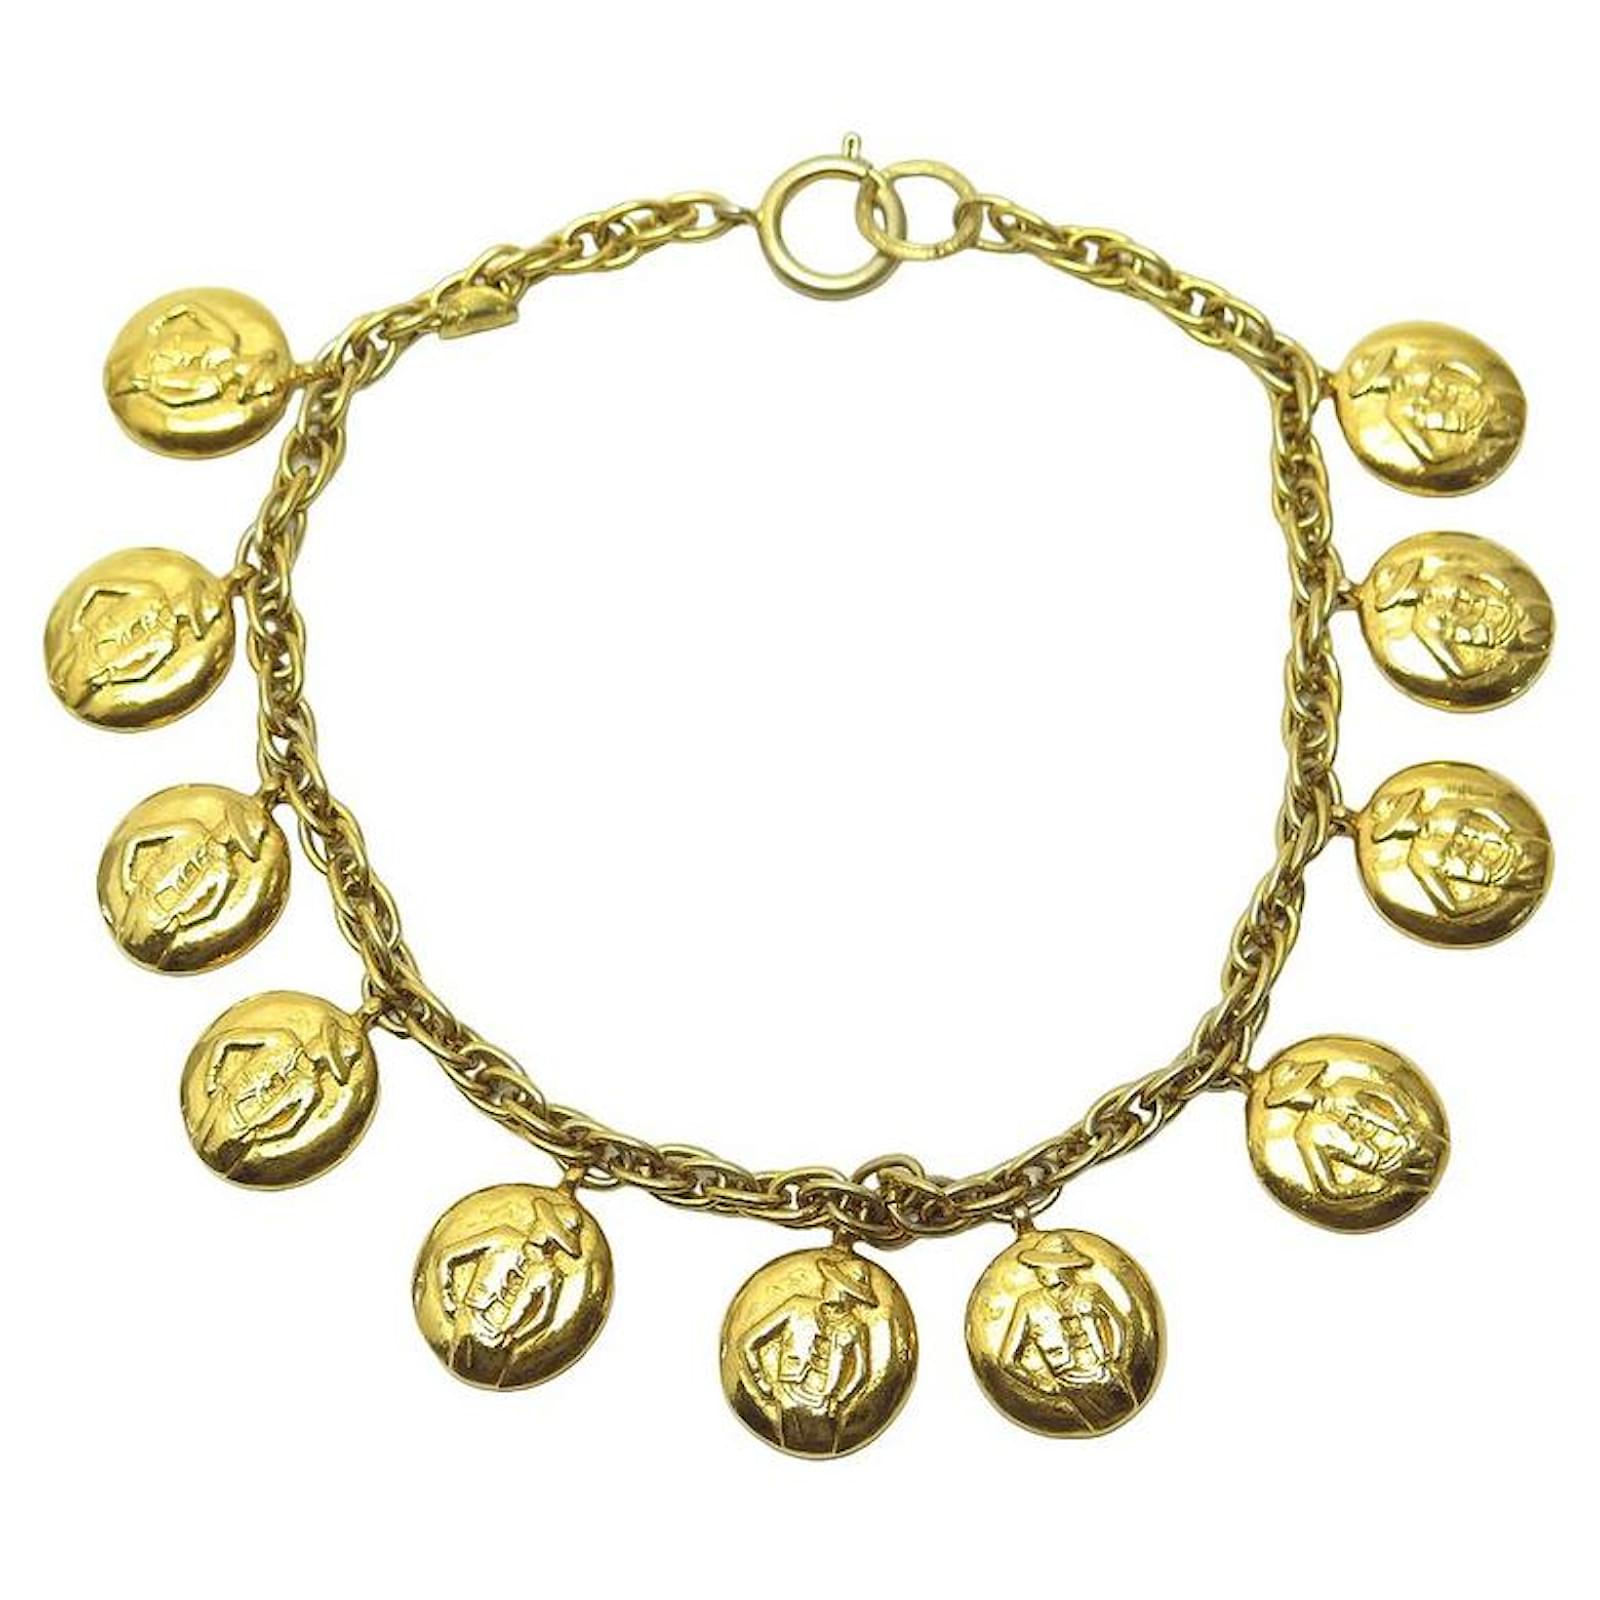 VINTAGE CHANEL NECKLACE 11 MADEMOISELLE GABRIELLE COCO GOLD